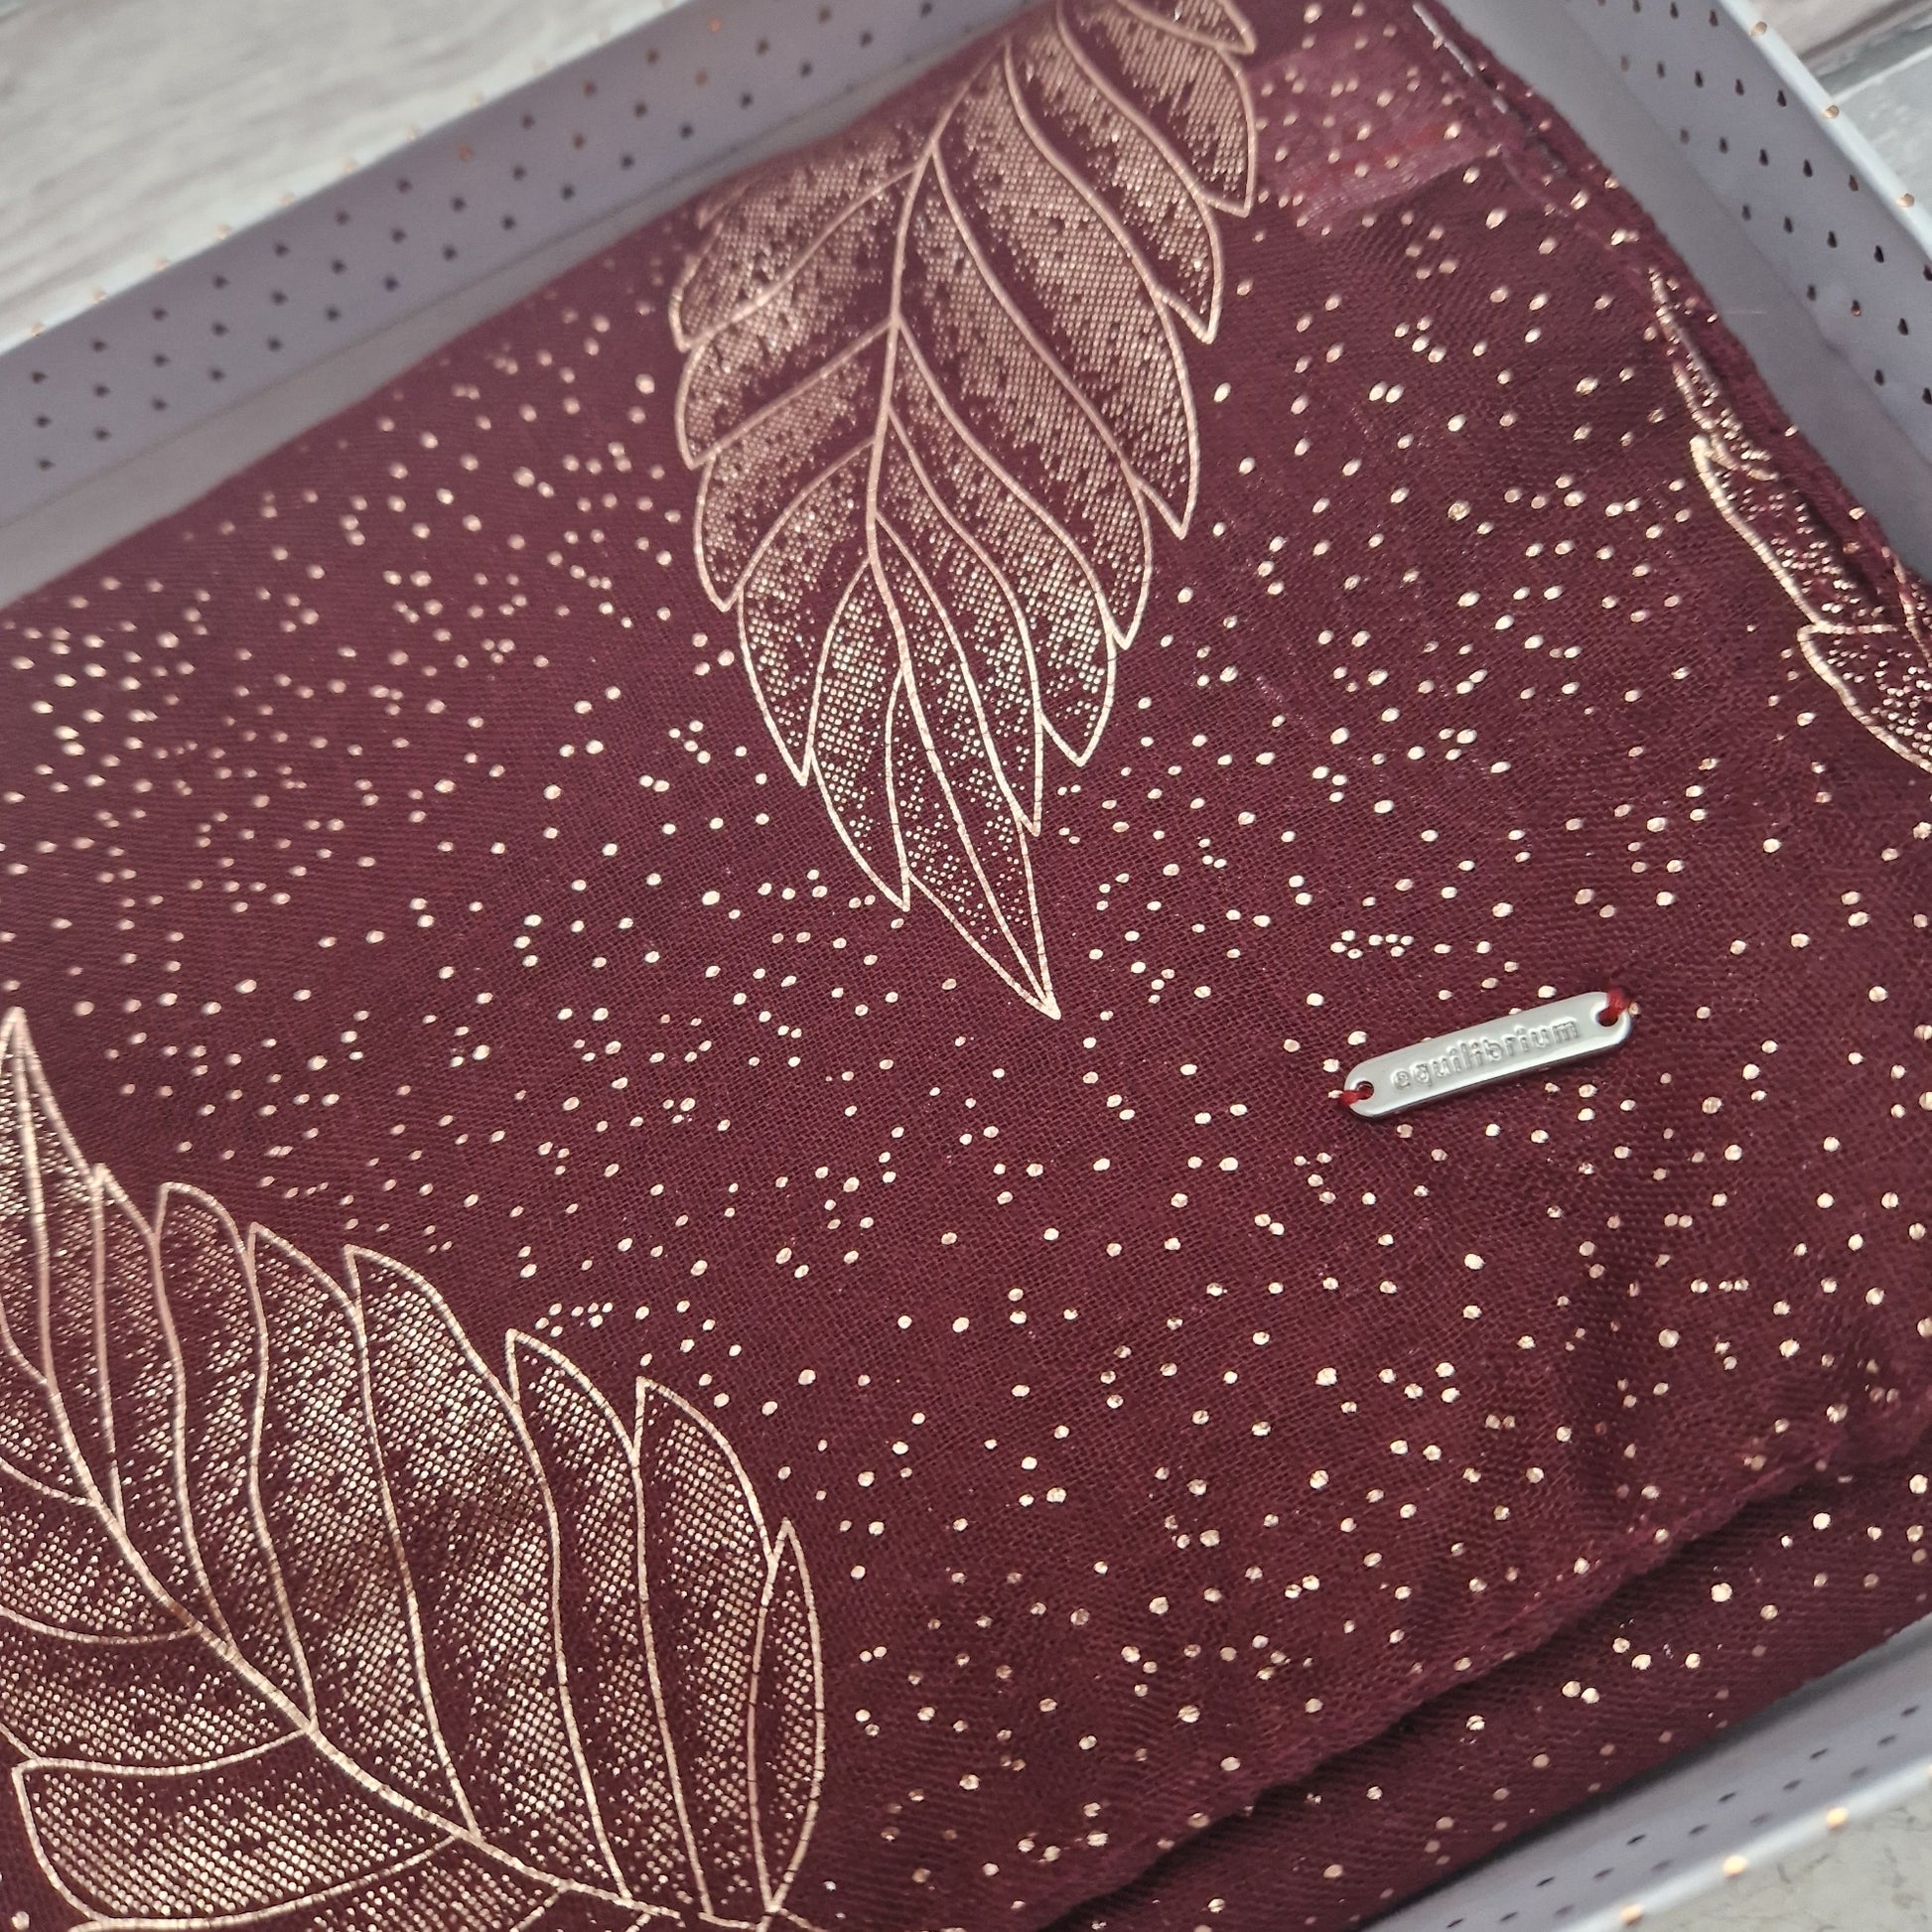 Gift Boxed Burgundy coloured scarf with leaf pattern in metallic rose gold.